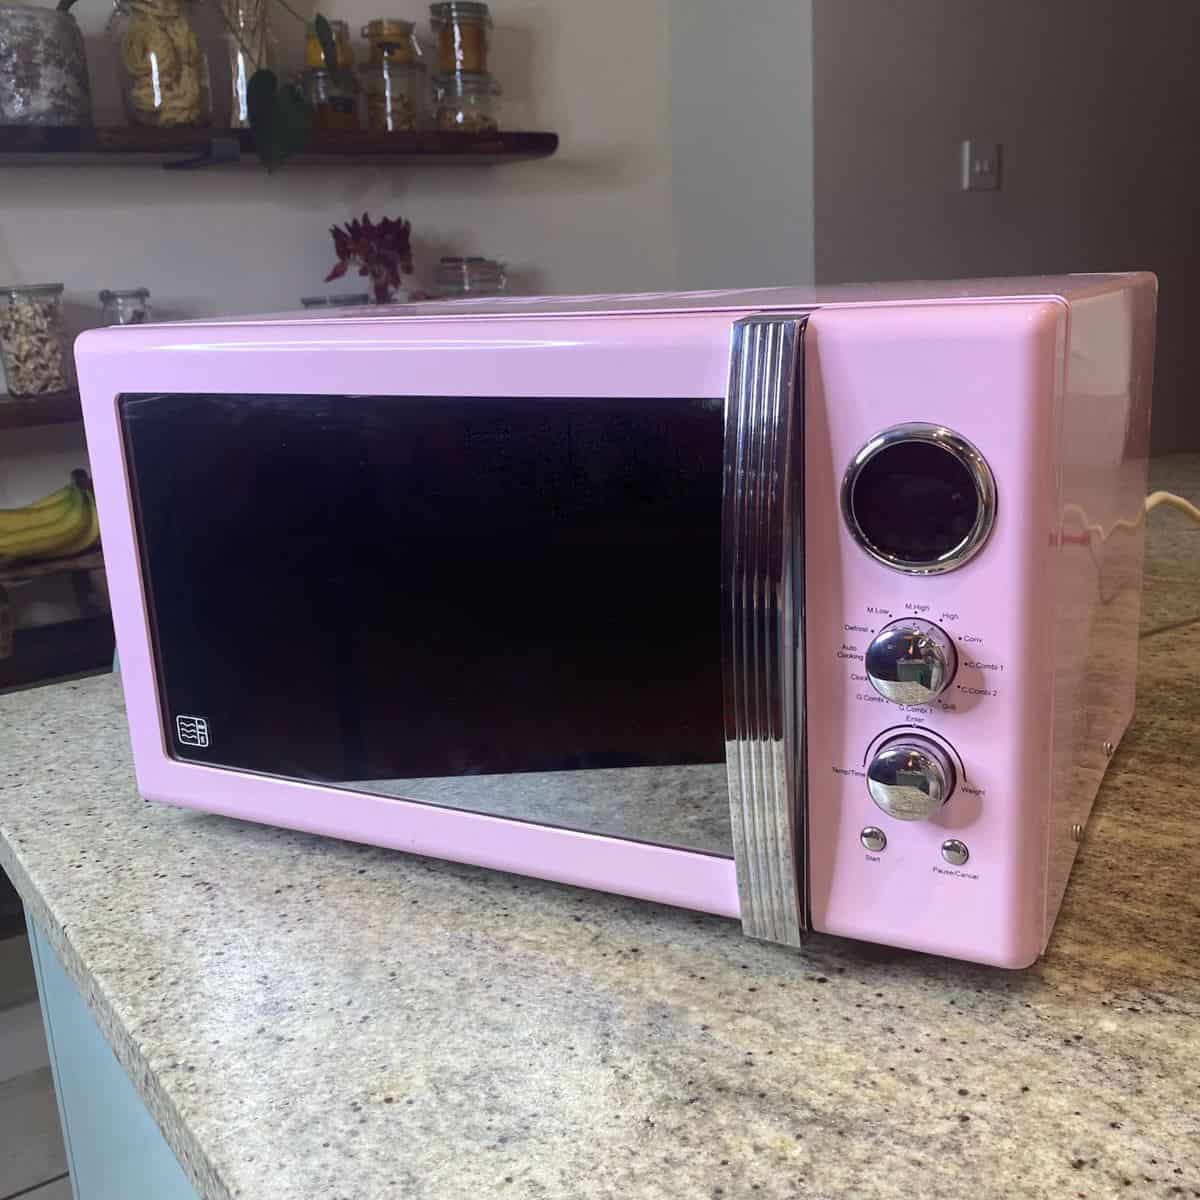 https://www.alphafoodie.com/wp-content/uploads/2021/02/how-to-clean-the-microwave-1-of-1.jpeg